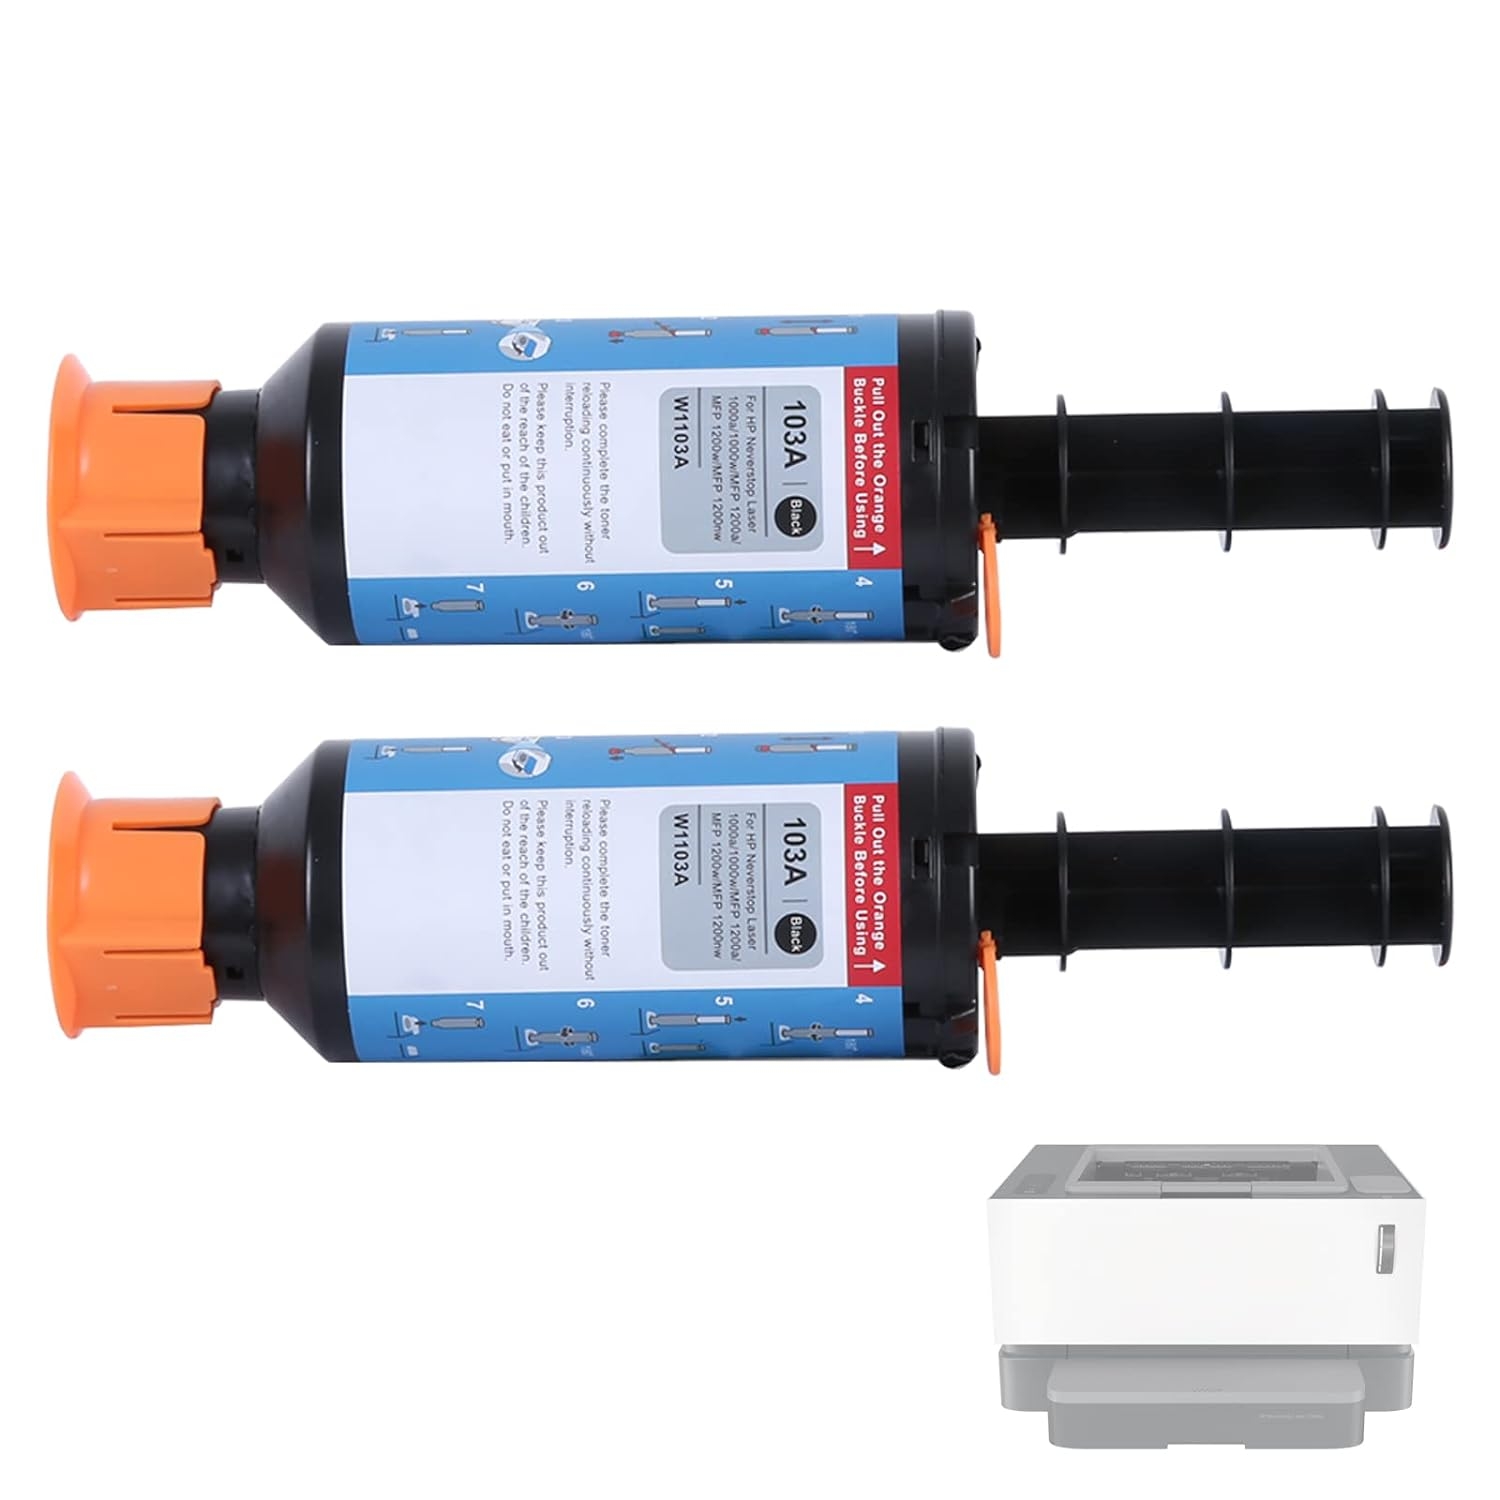 Proffisy Cartridge for HP 103A/ W1103A, Toner Reload Kit for HP Neverstop Laser MFP 1200w, MFP 1200a, 1000a, 1000w - 2 Pcs